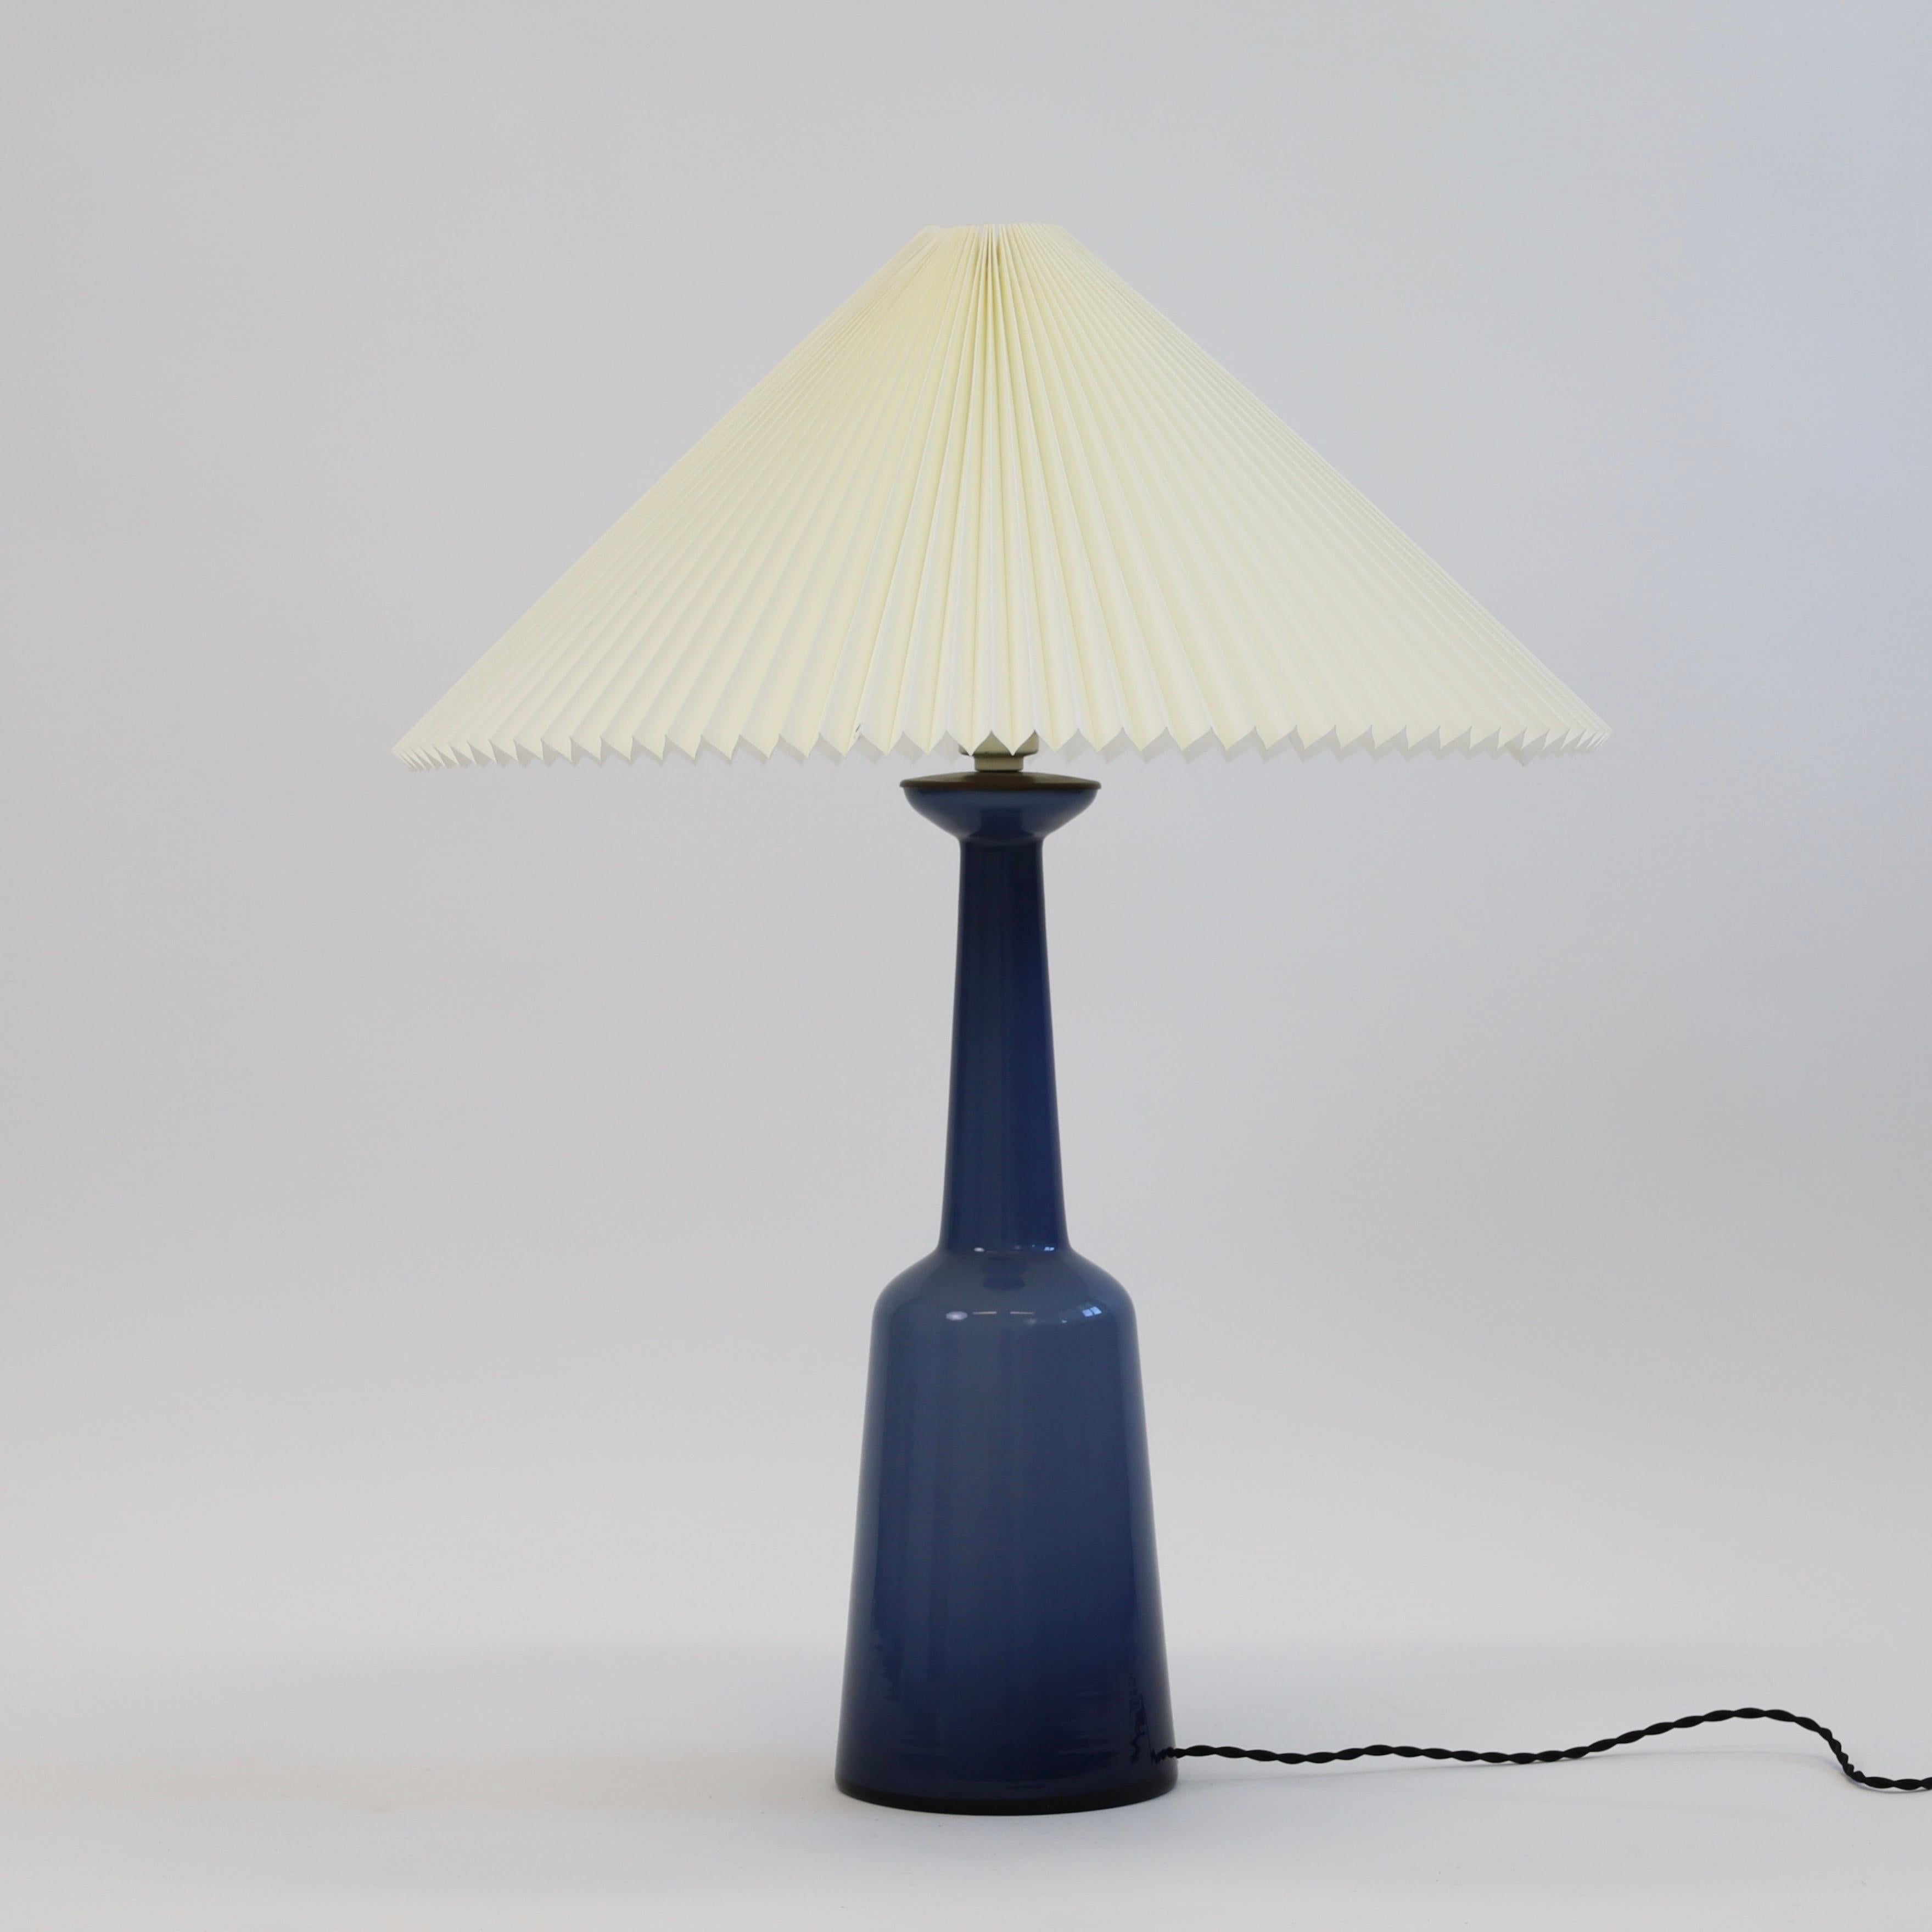 A sizeable 1950s glass table lamp by Kastrup Glasvaerk - almost floor size. Remarkable deep night blue and an eye-catching piece for a beautiful space. 

* A blue glass table lamp with a brass top and a pleated white fabric shade
* Manufacturer: